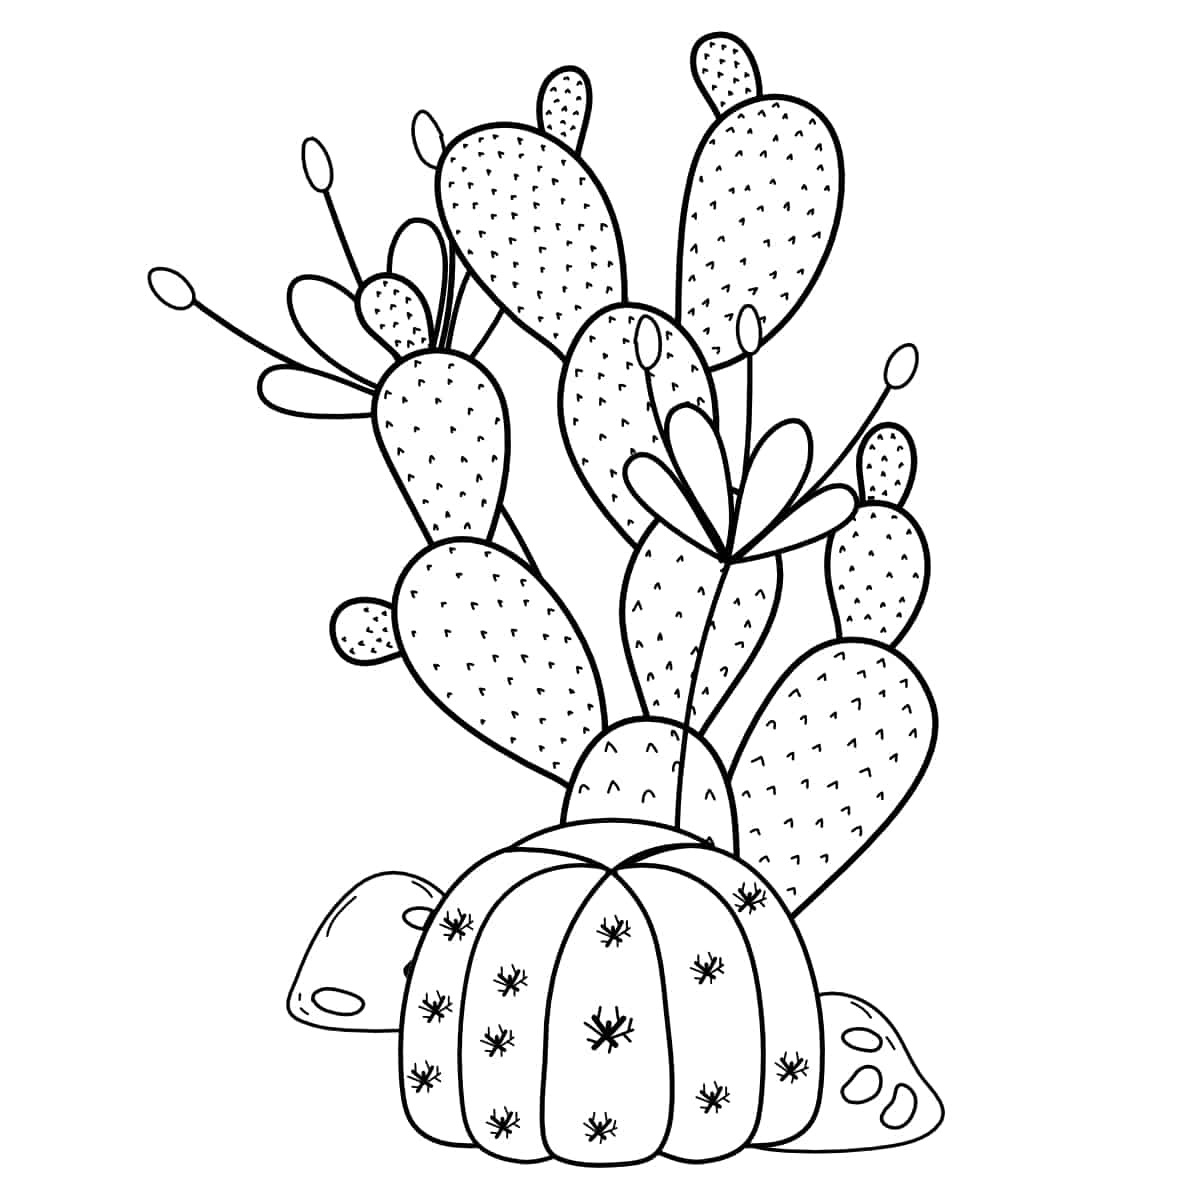 27 Free Cactus Coloring Pages (Printable PDFs)